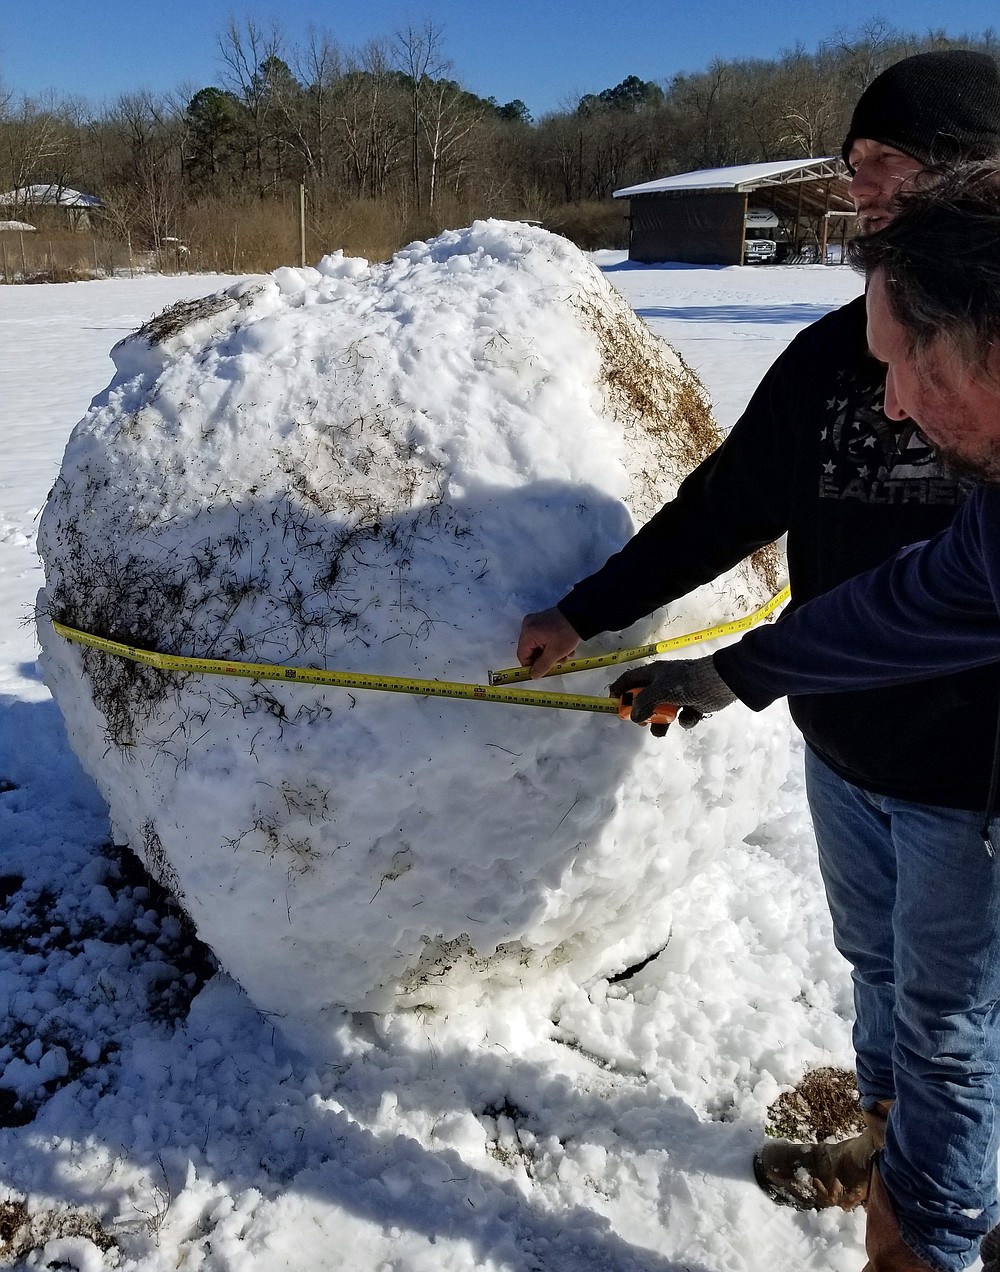 An early measurement of the snowball shows a circumference of about 16 feet. The final measurement of the circumference was 26 feet, according to Sarah Day, who organized the build. - Submitted photo